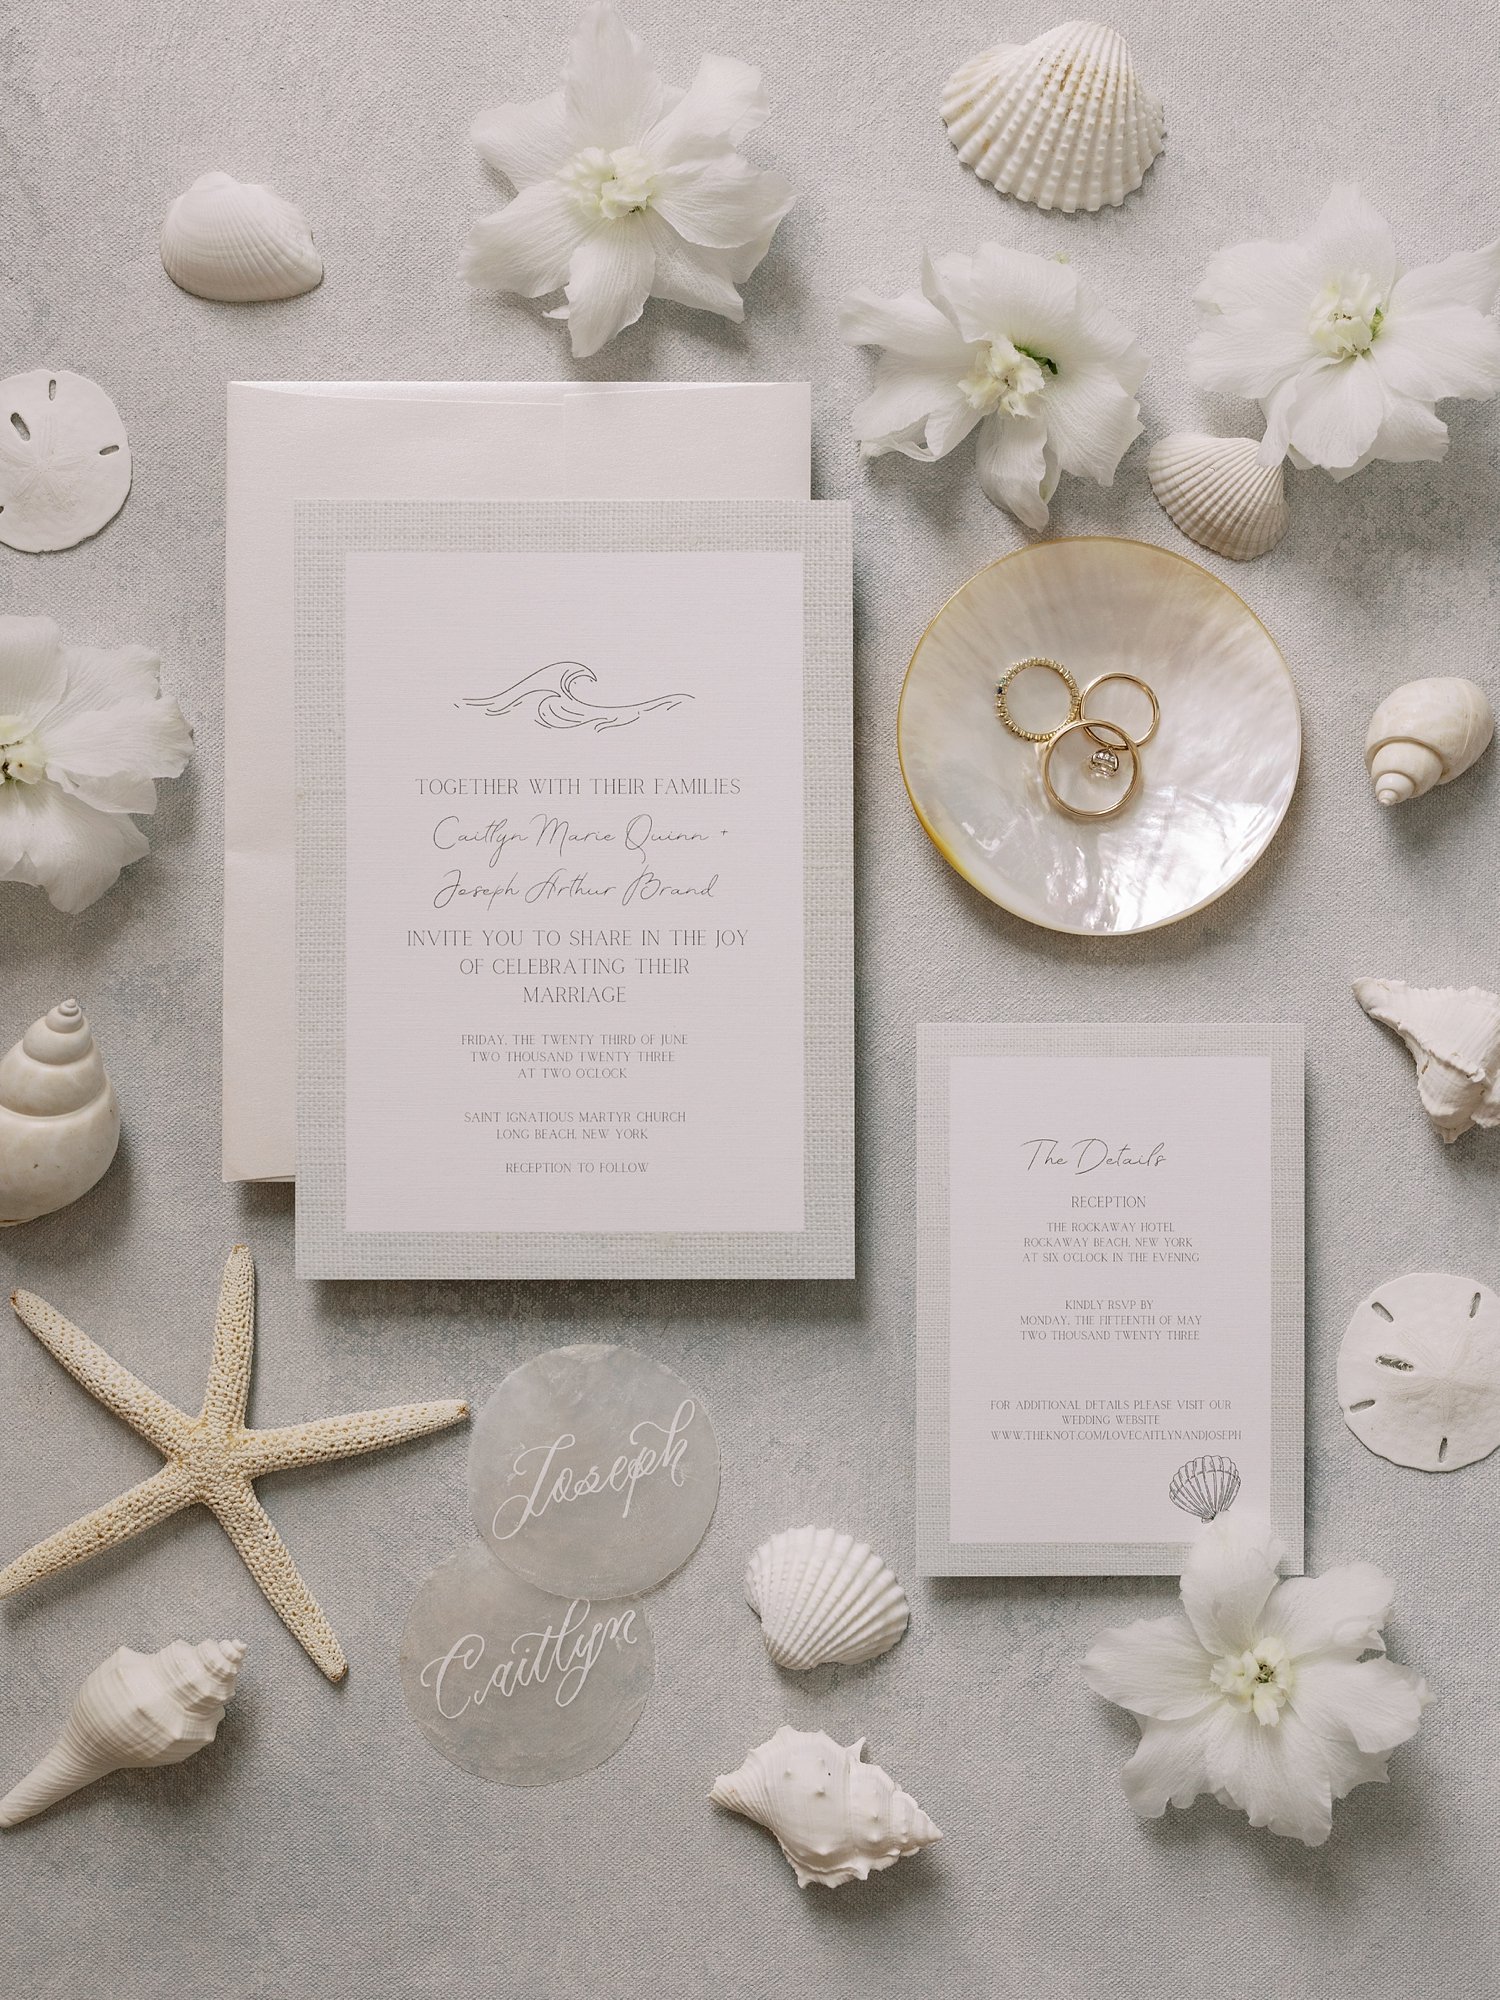 tropical inspired wedding invitations for wedding at the Rockaway Hotel